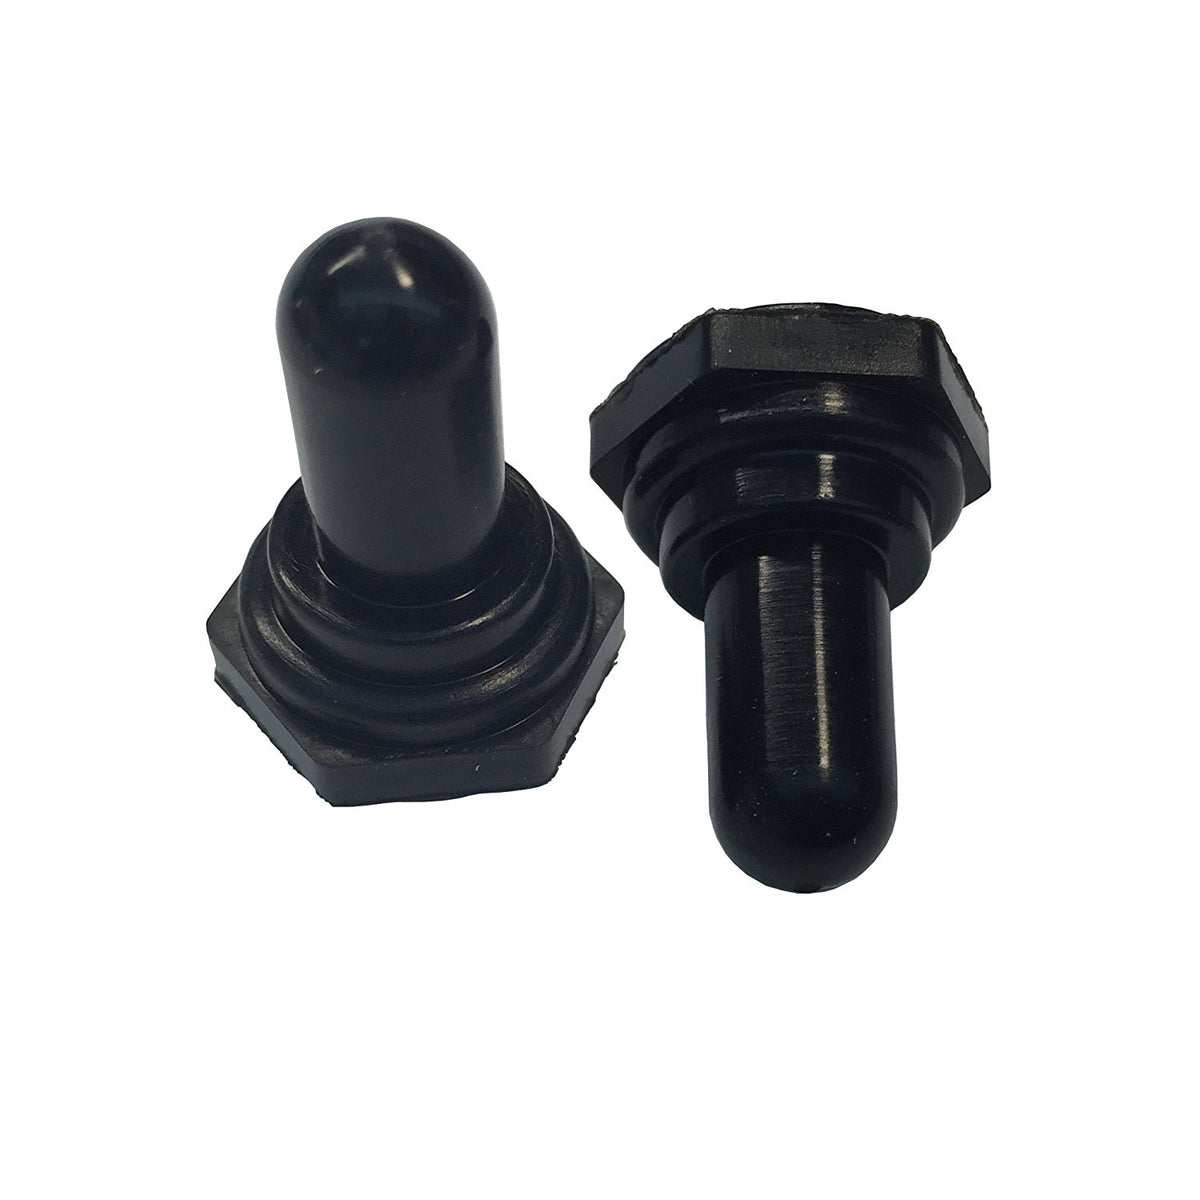 Gardner Bender GSW-20 Toggle Switch Covers, 2-Pack